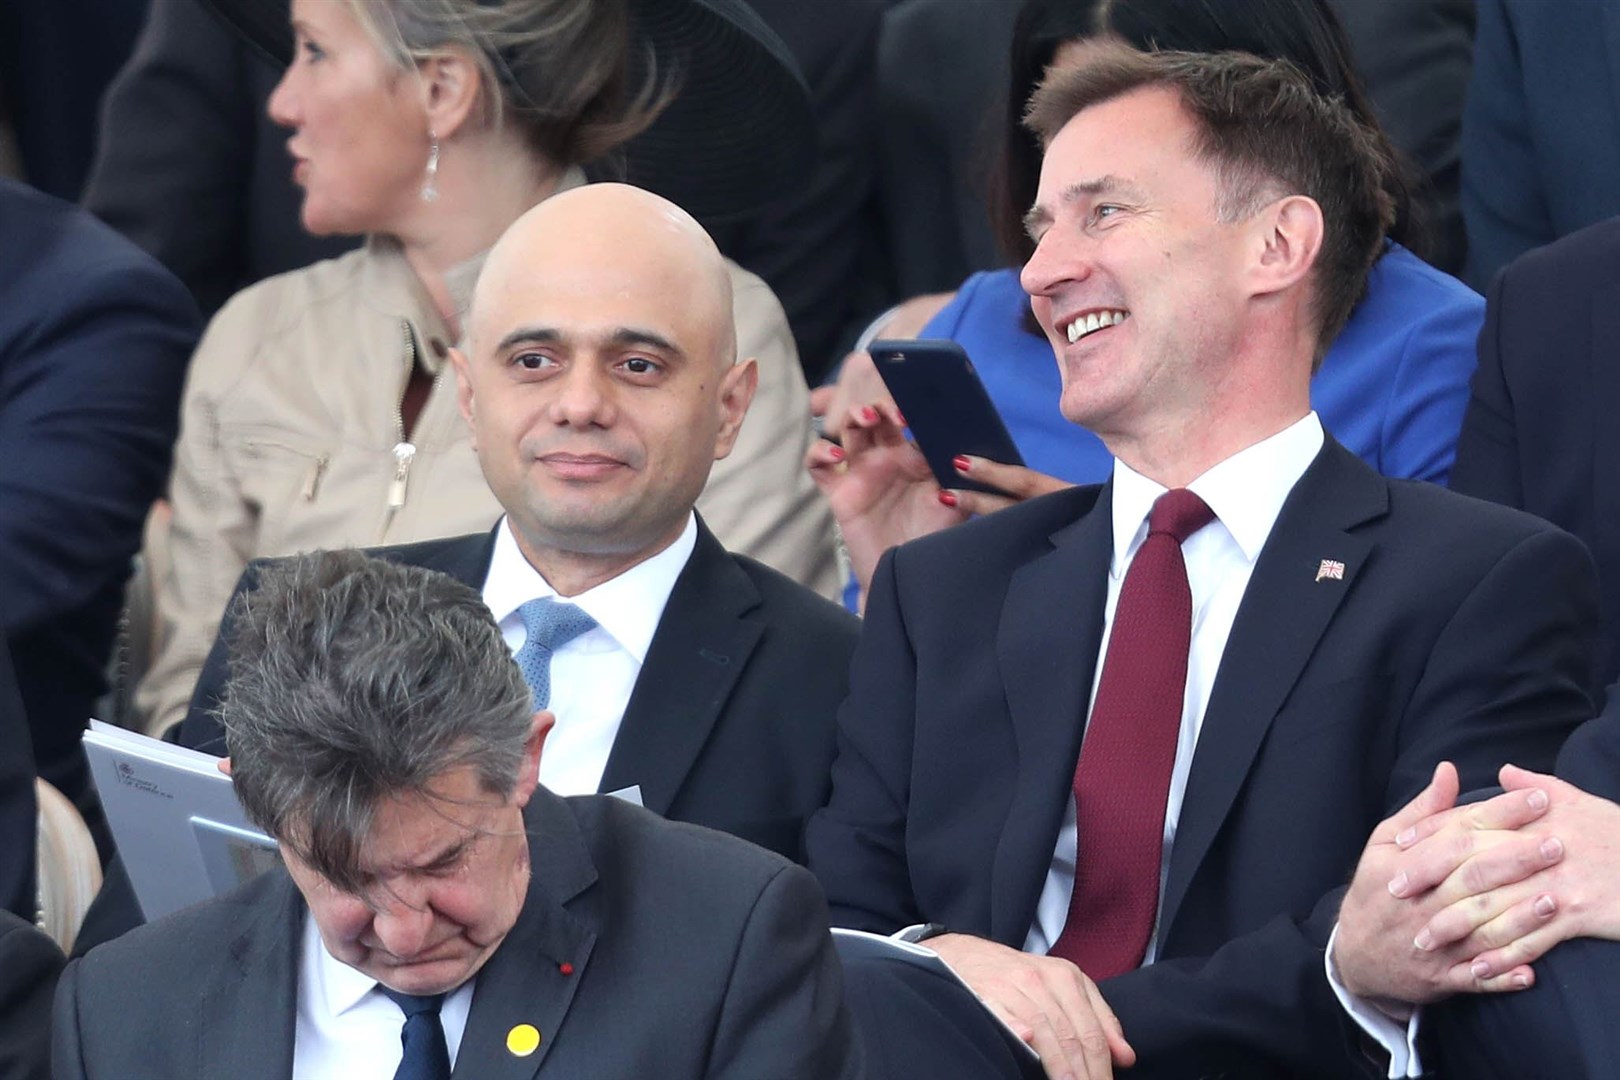 Sajid Javid and Jeremy Hunt both said they would scrap the ex-chancellor’s plans to raise corporation tax (Chris Jackson/PA)